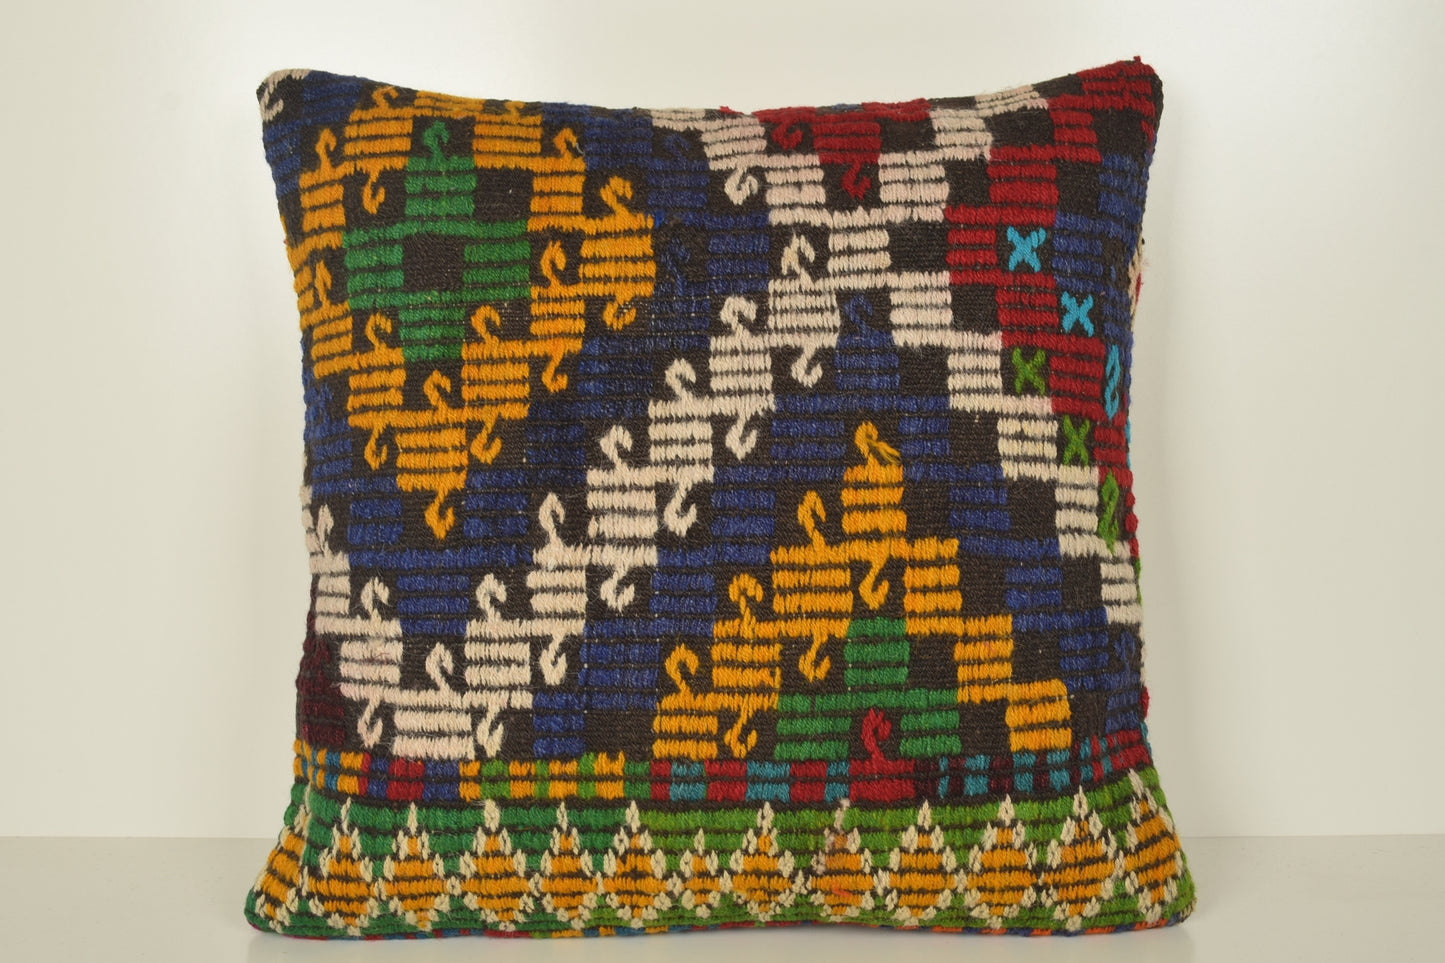 Moroccan Kilim Pillows A00857 Wholesale pillow cover 24x24 Mexican cushion covers